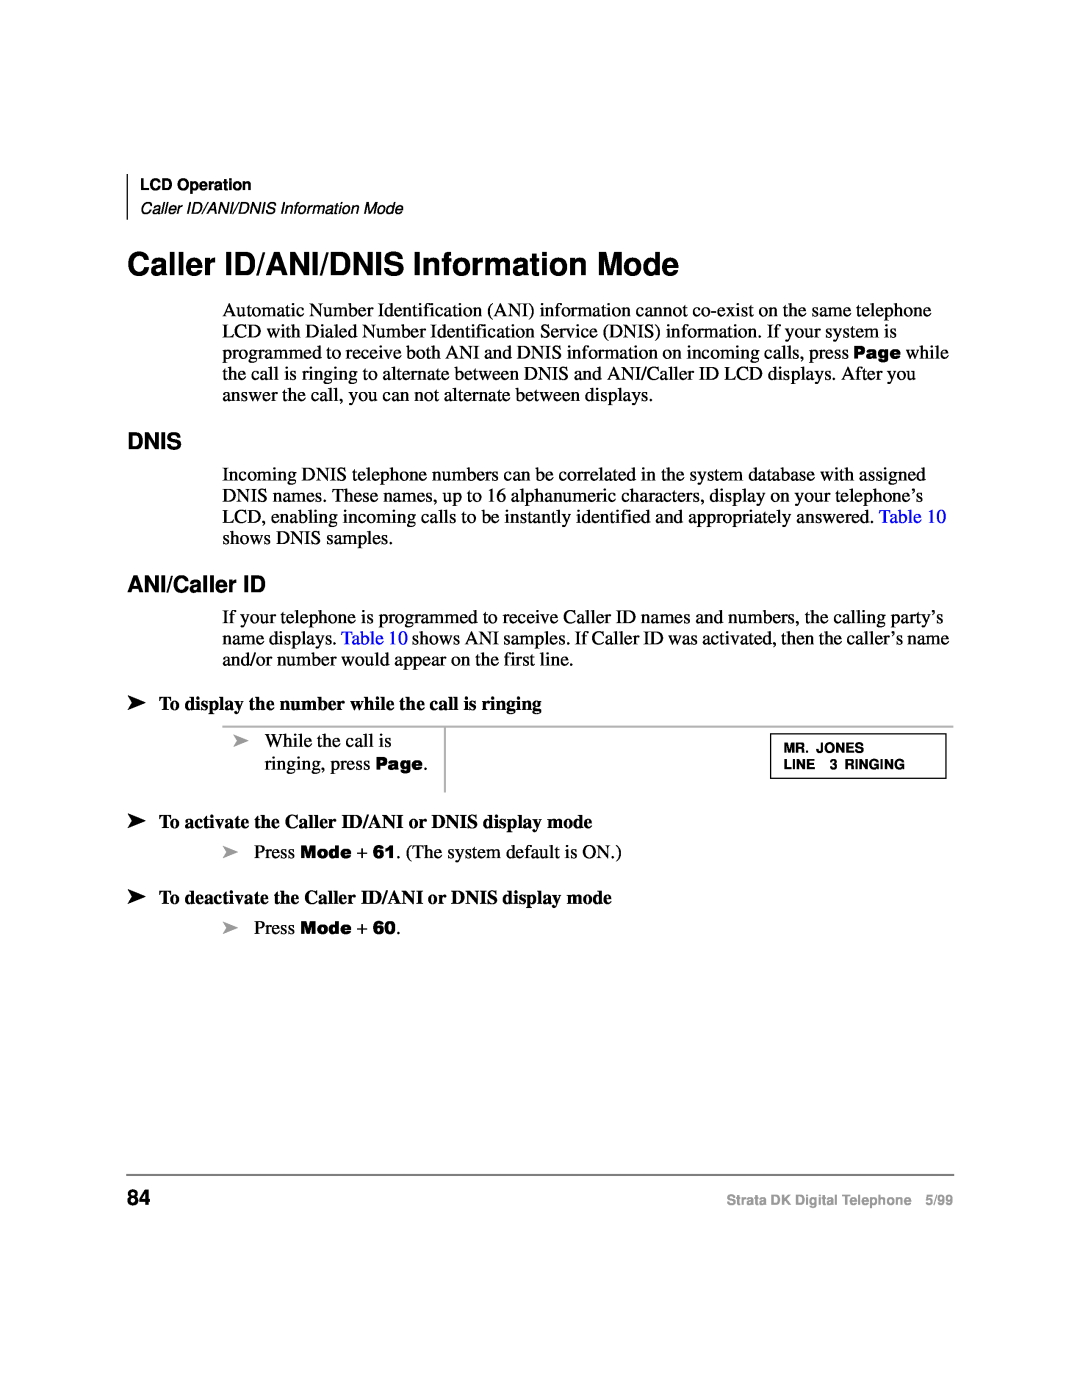 Toshiba CT manual Caller ID/ANI/DNIS Information Mode, Dnis, ANI/Caller ID, To display the number while the call is ringing 